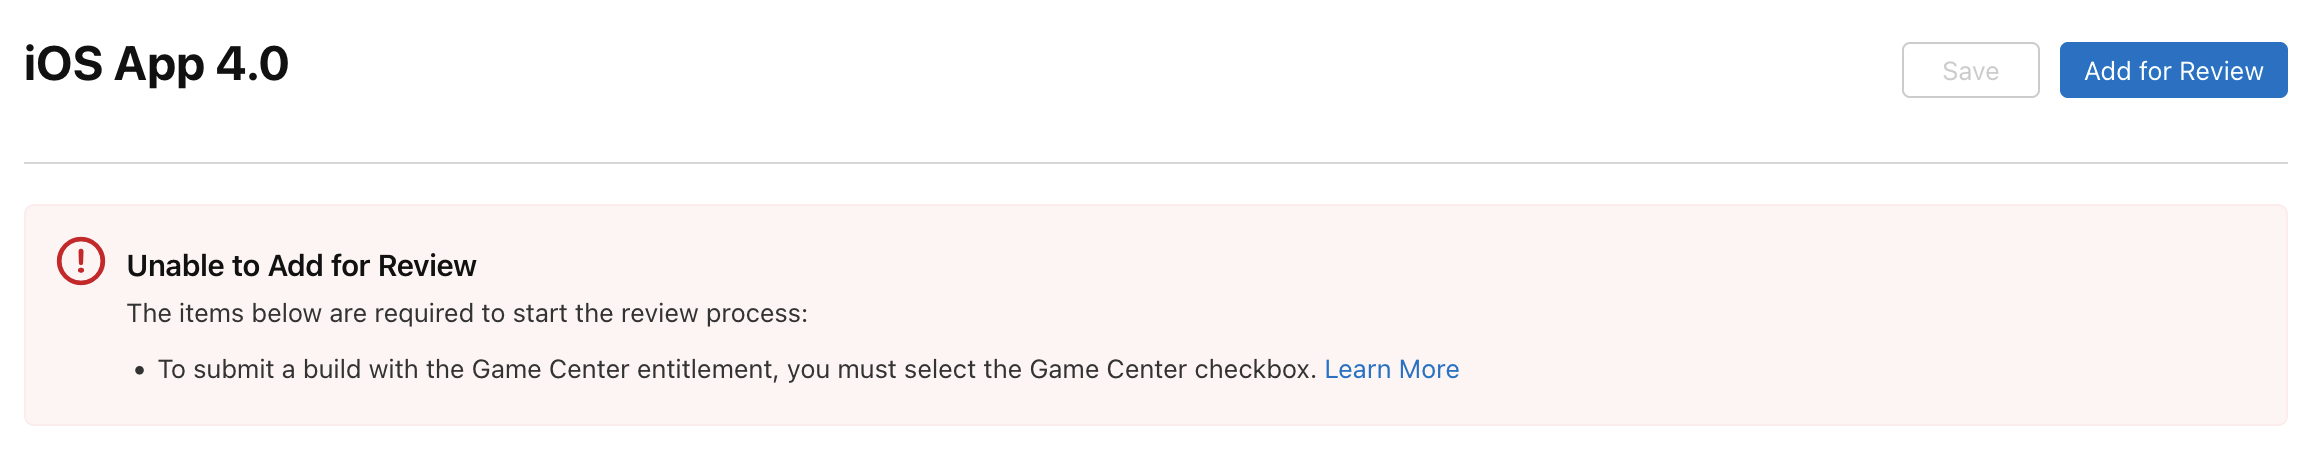 To submit a build with the Game Center entitlement, you must select the Game Center checkbox